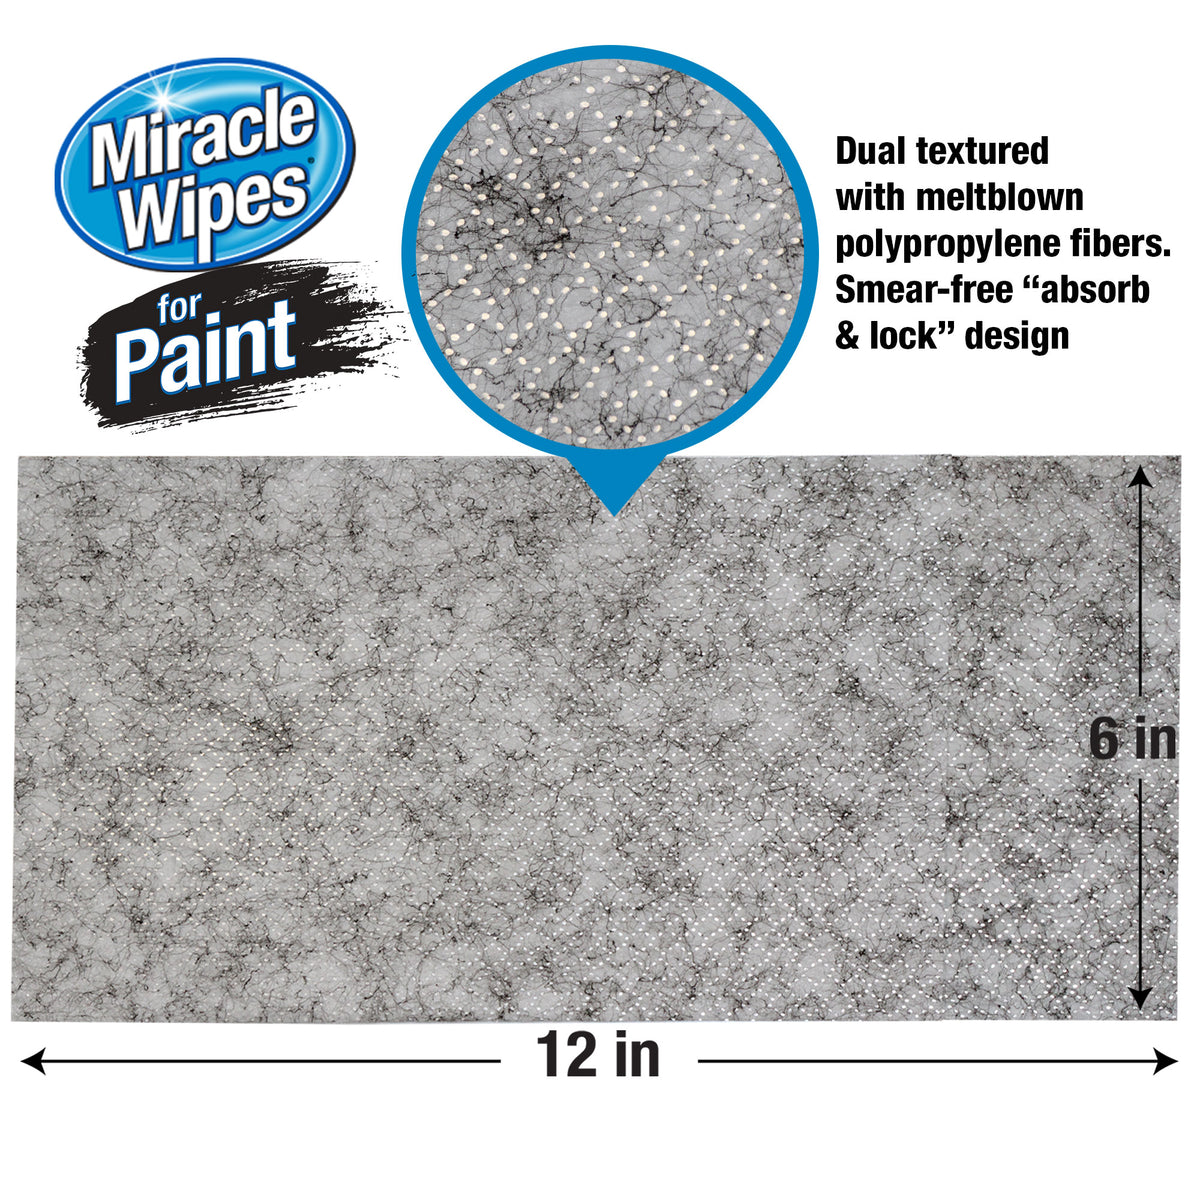 Miracle Wipes for Leather – Columbus Trading